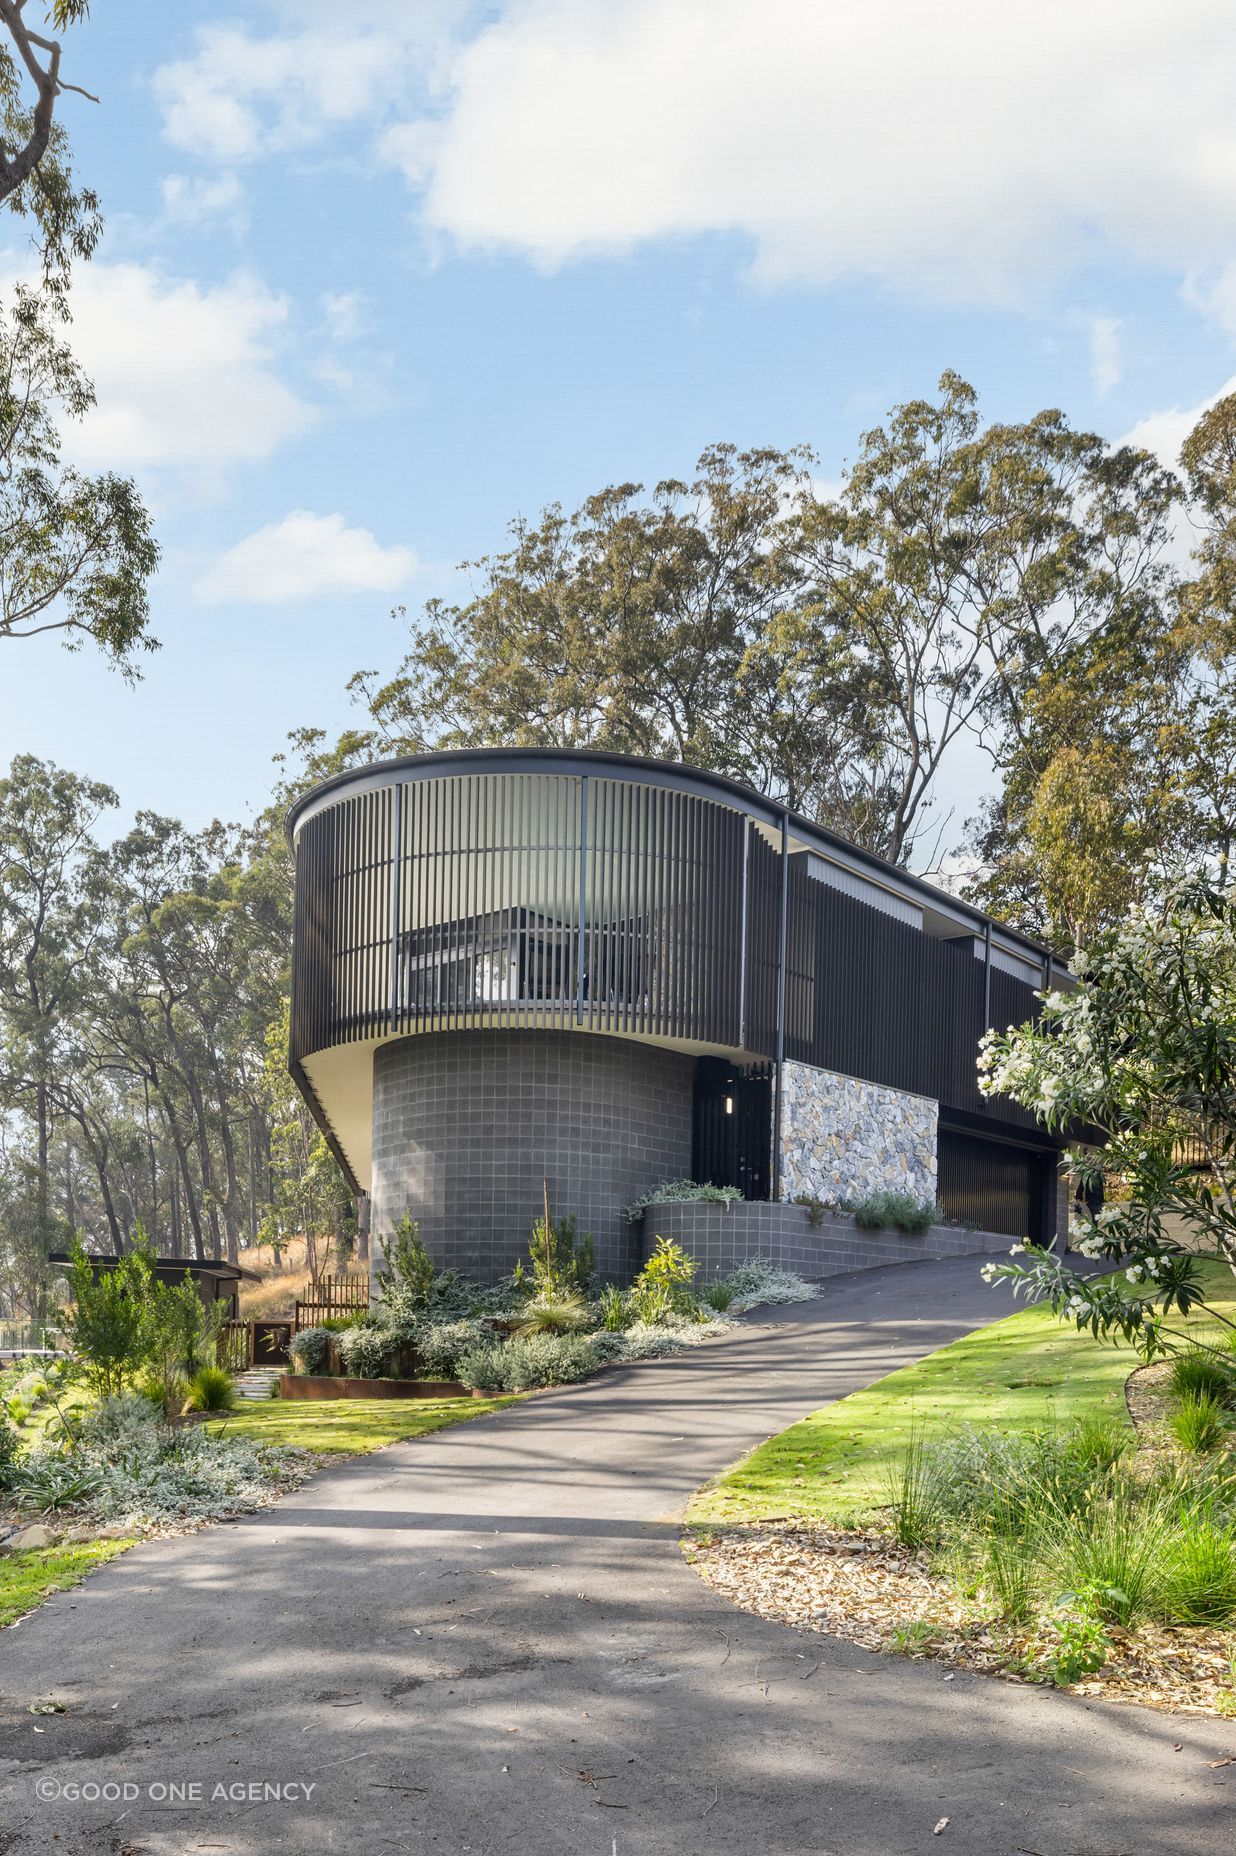 Robust materials were chosen for the exterior, including shot-blasted face blockwork, extensive glazing, and metal roofing, to fortify the structure against potential bushfire threats.